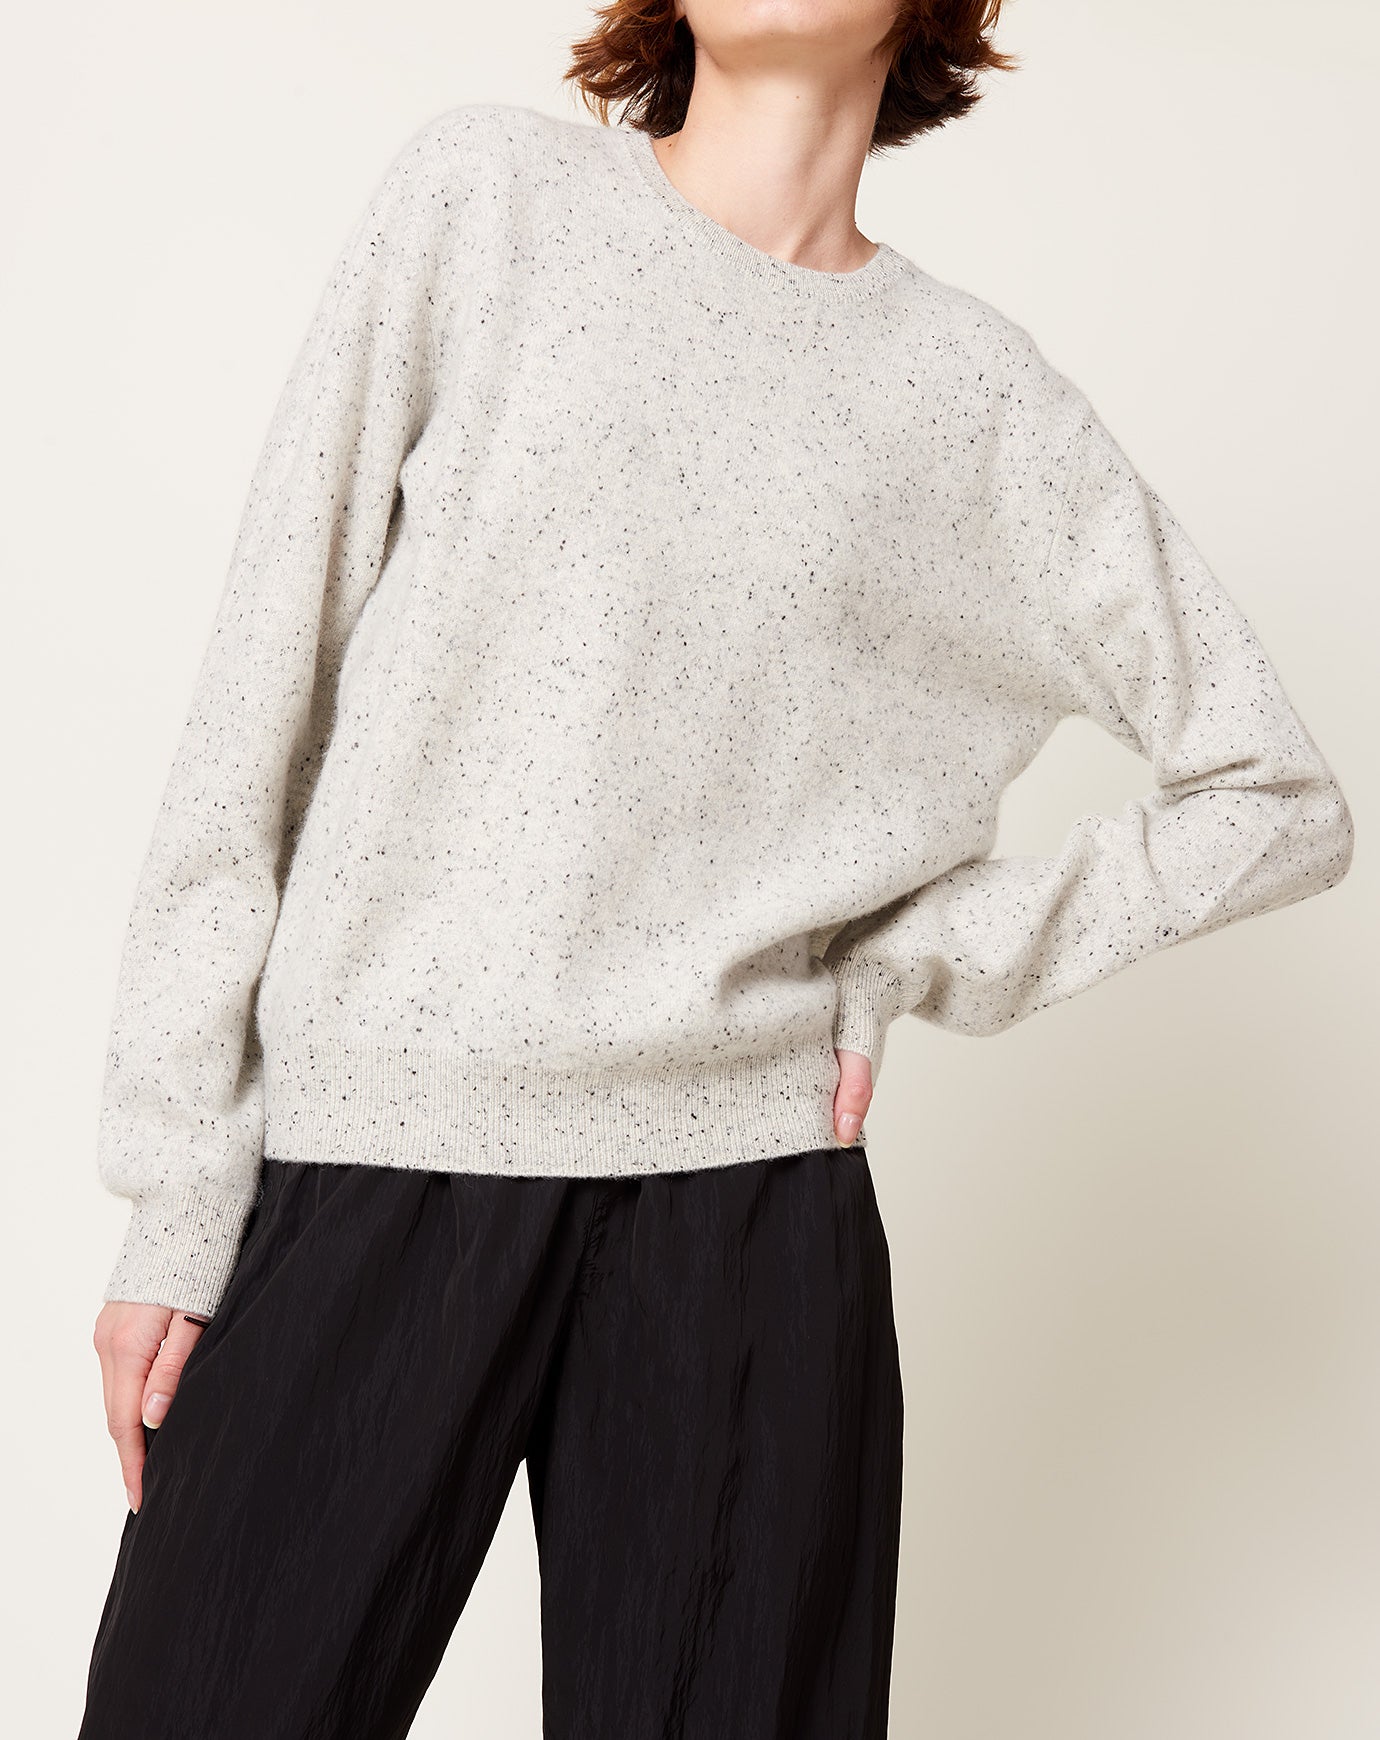 Frenckenberger Mini R Neck Sweater in Pointilised Frost